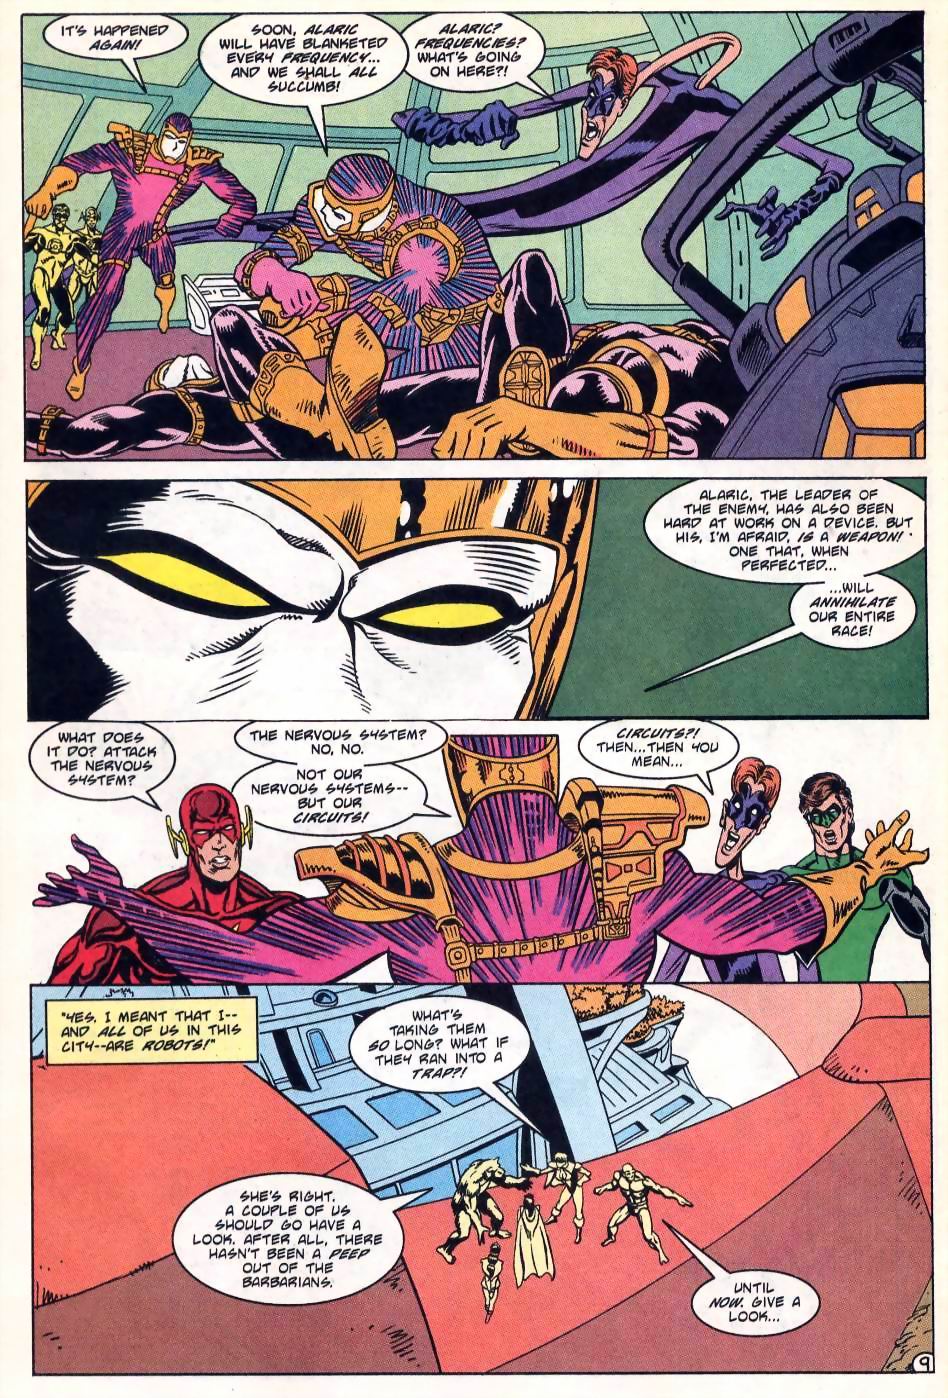 Justice League International (1993) 55 Page 10